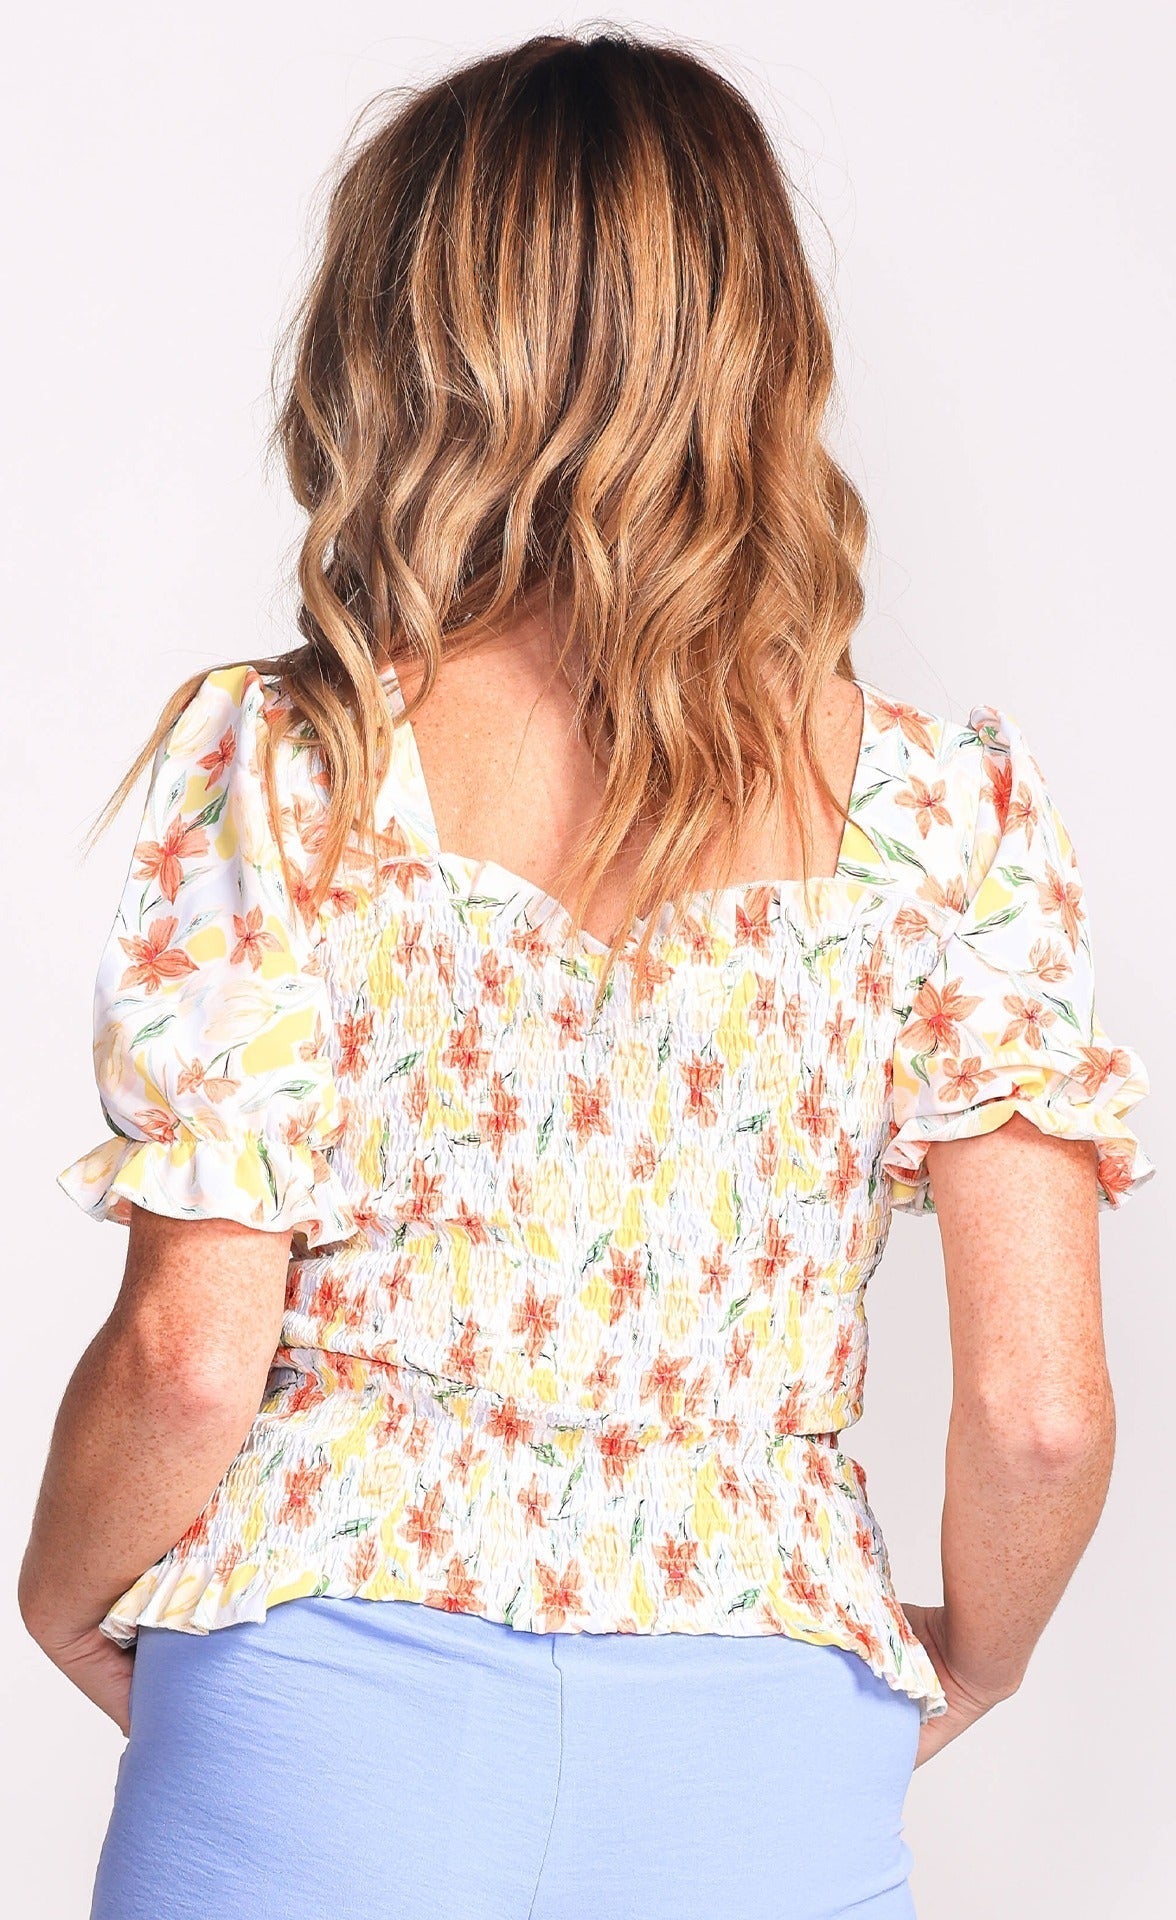 Back view of Pink Martini (TO-230504) Zinnia Top - Women's Short Puff Sleeve Top with Square Neck and Smocked Bodice in a yellow and orange floral print